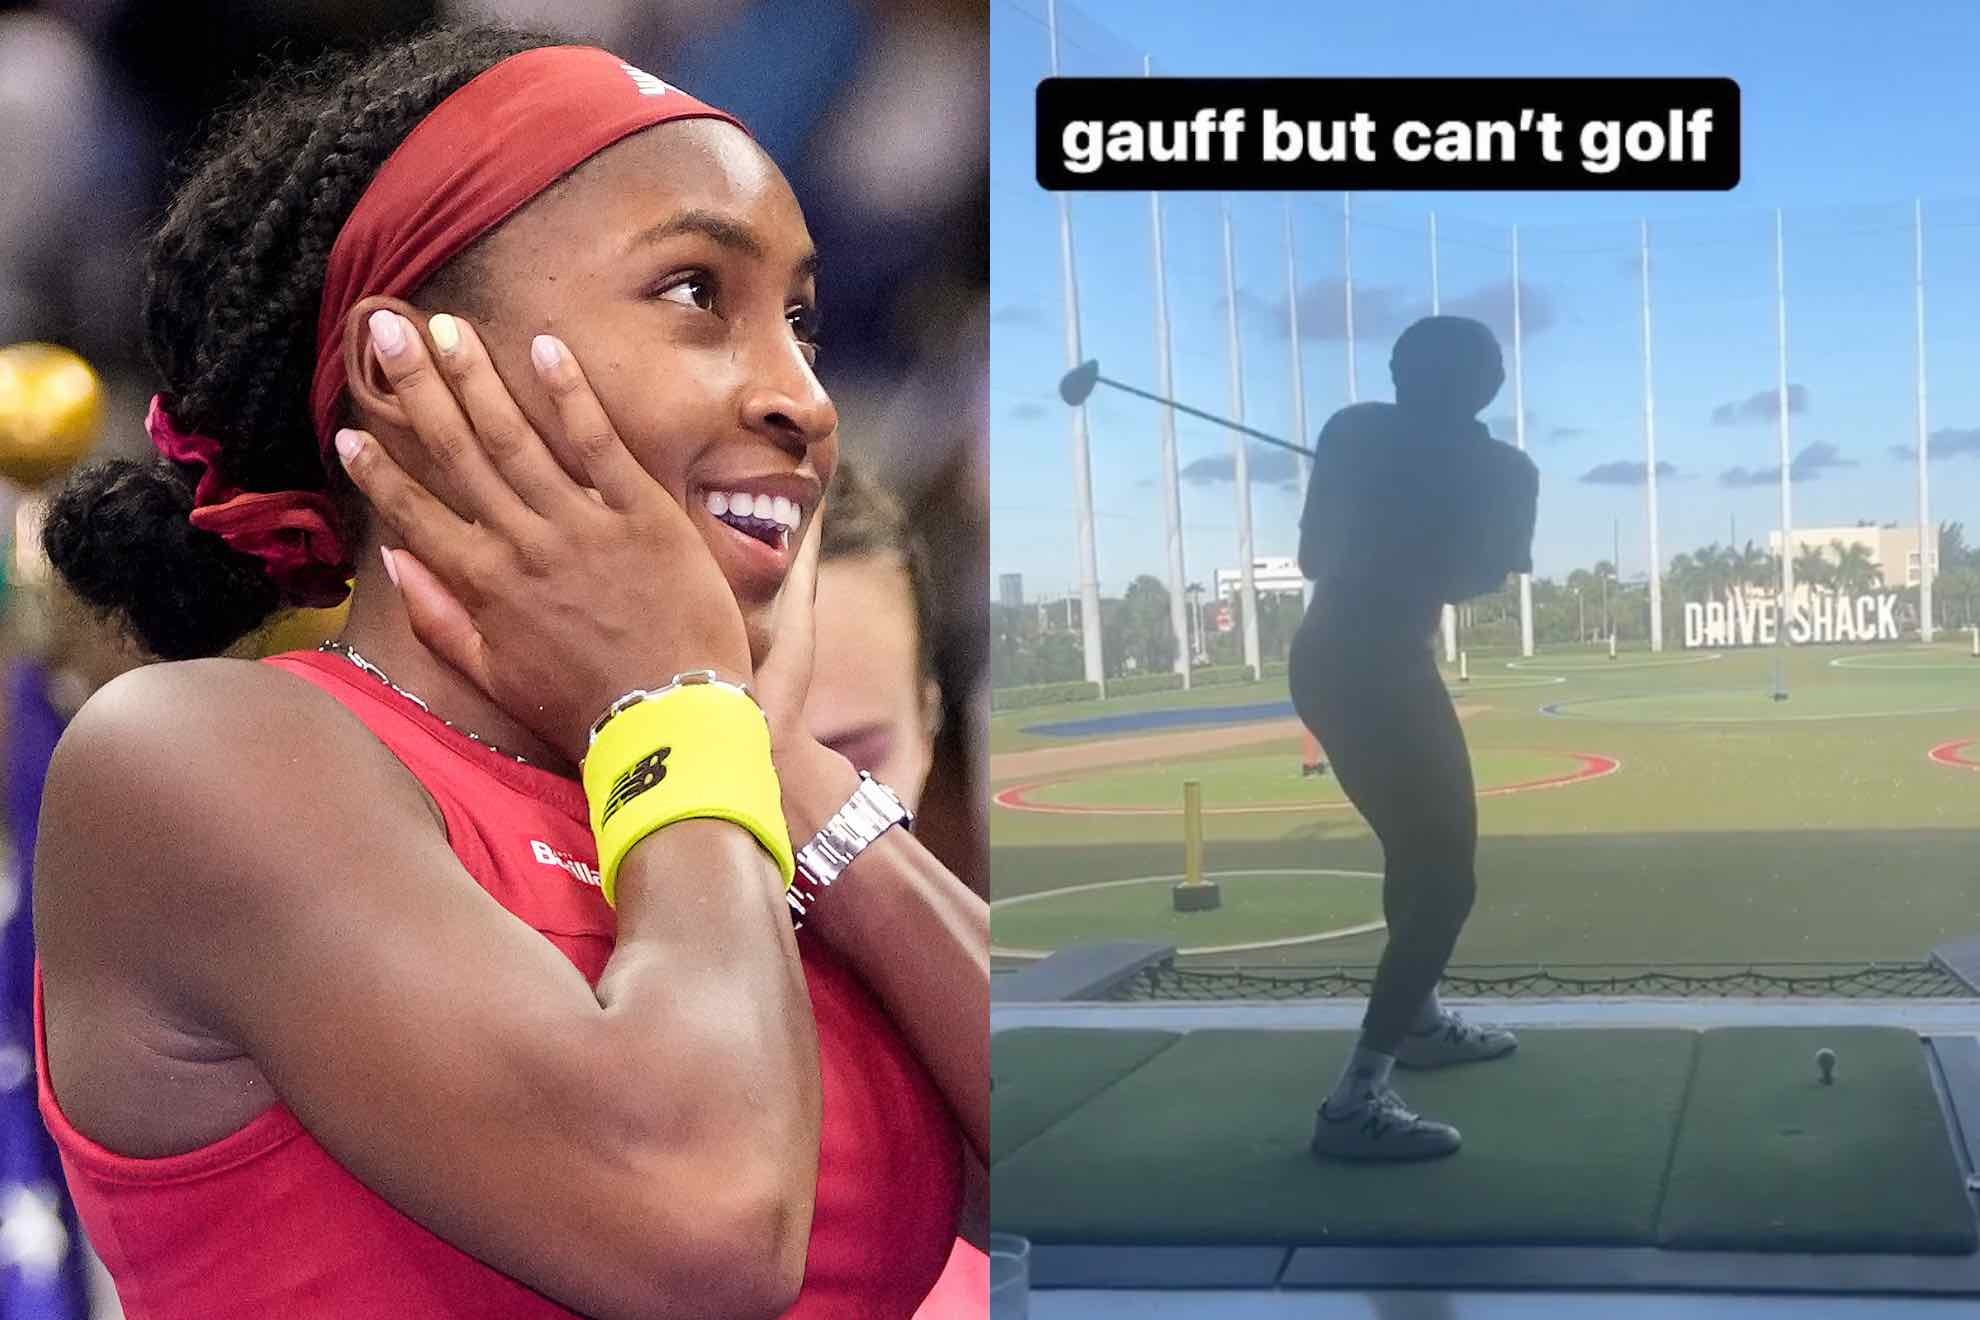 Coco Gauff struggles at the golf course